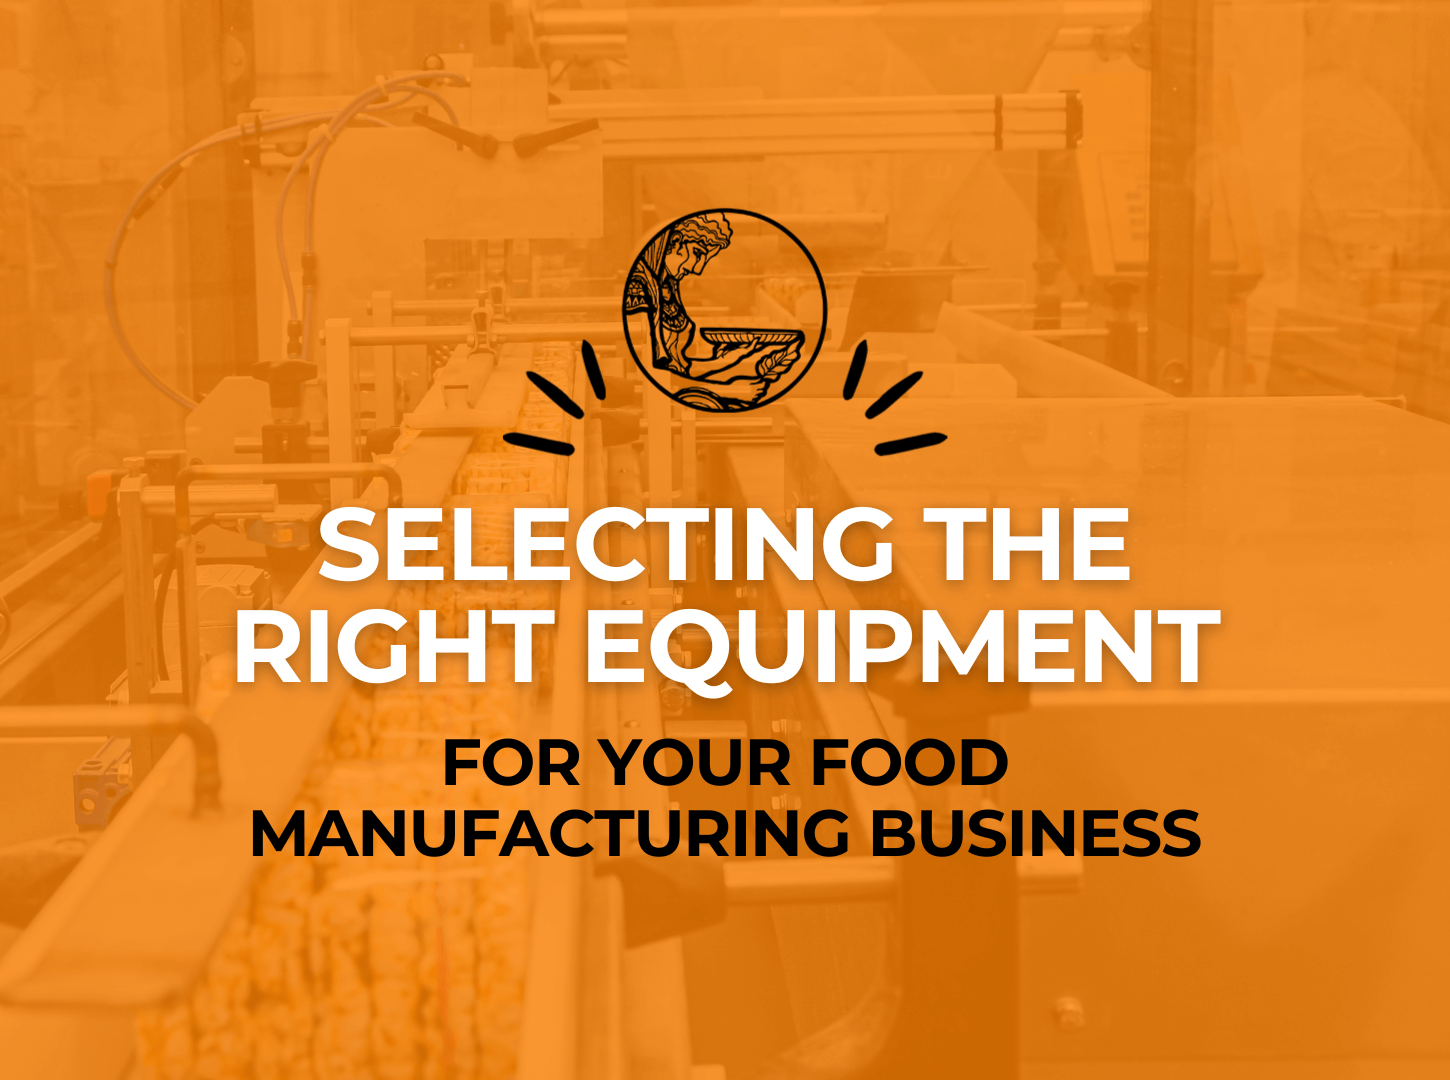 Featured image for “Selecting the Right Equipment for Your Food Manufacturing Business”